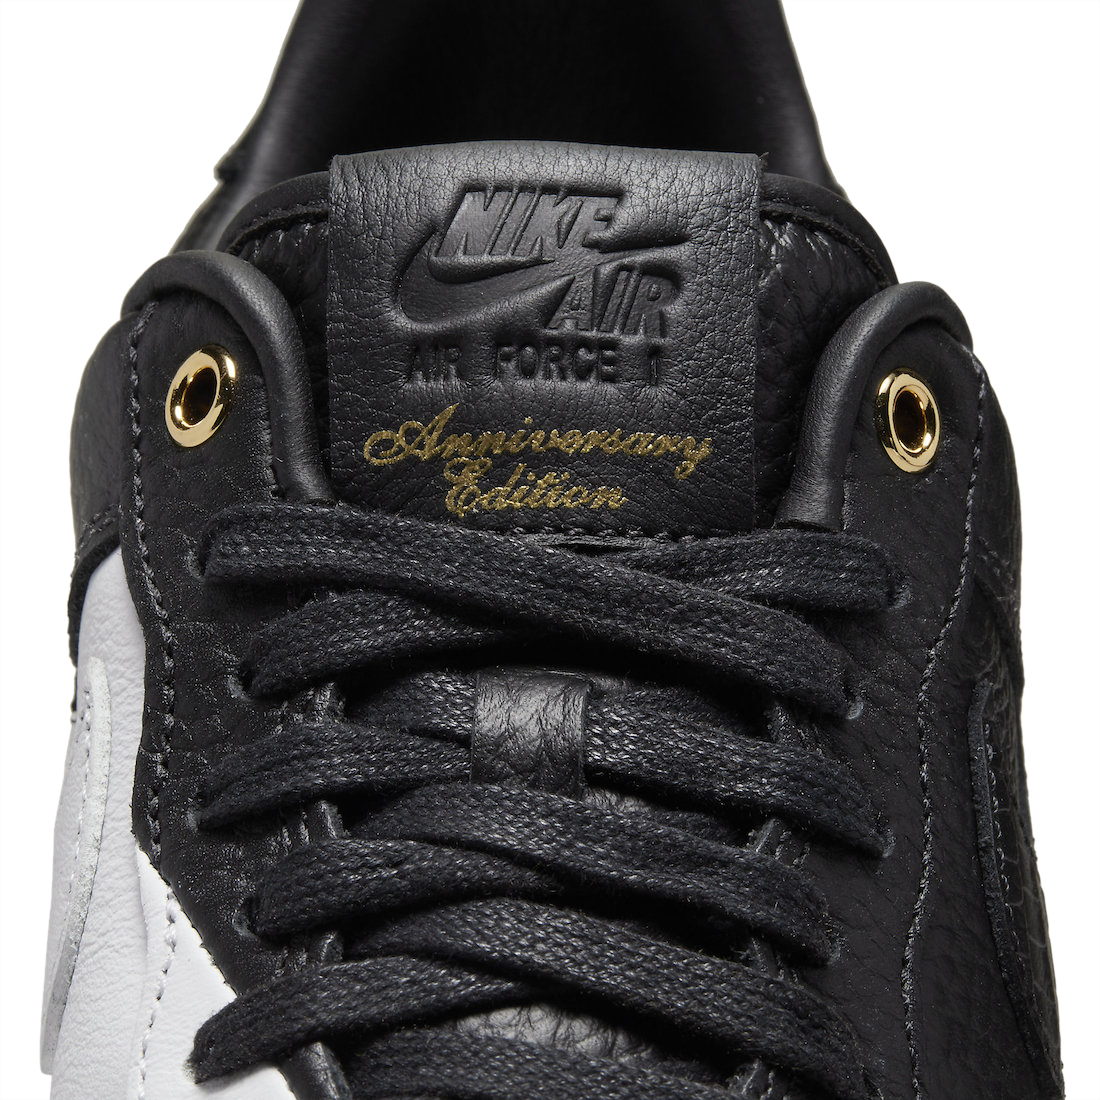 Nike Air Force 1 Low Anniversary Edition DX6034-001